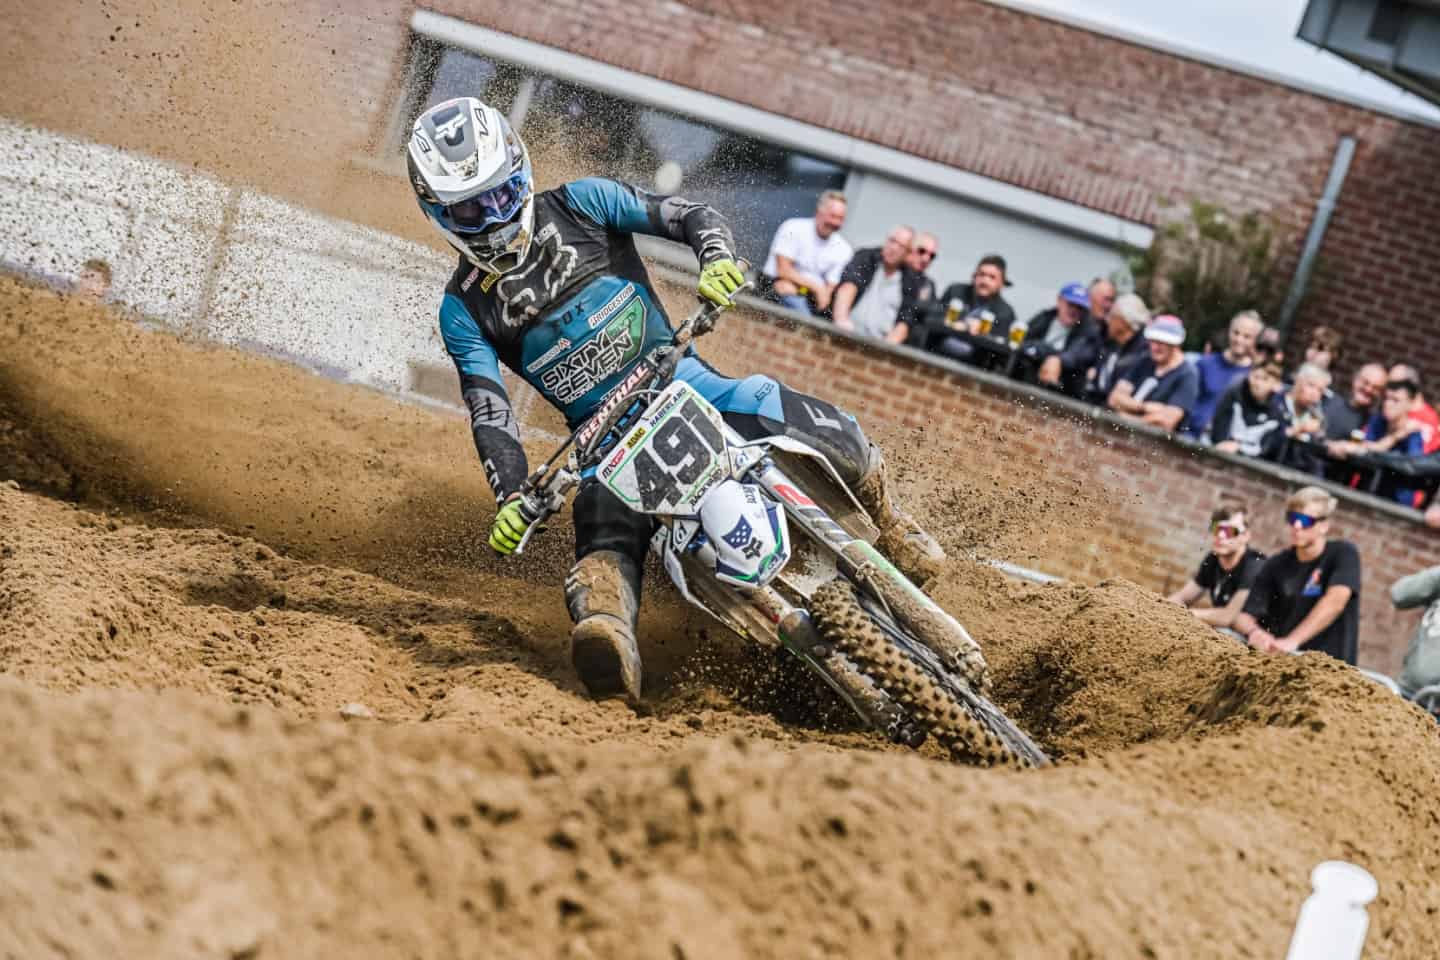 PM Team SixtySeven – MXGP of Flanders